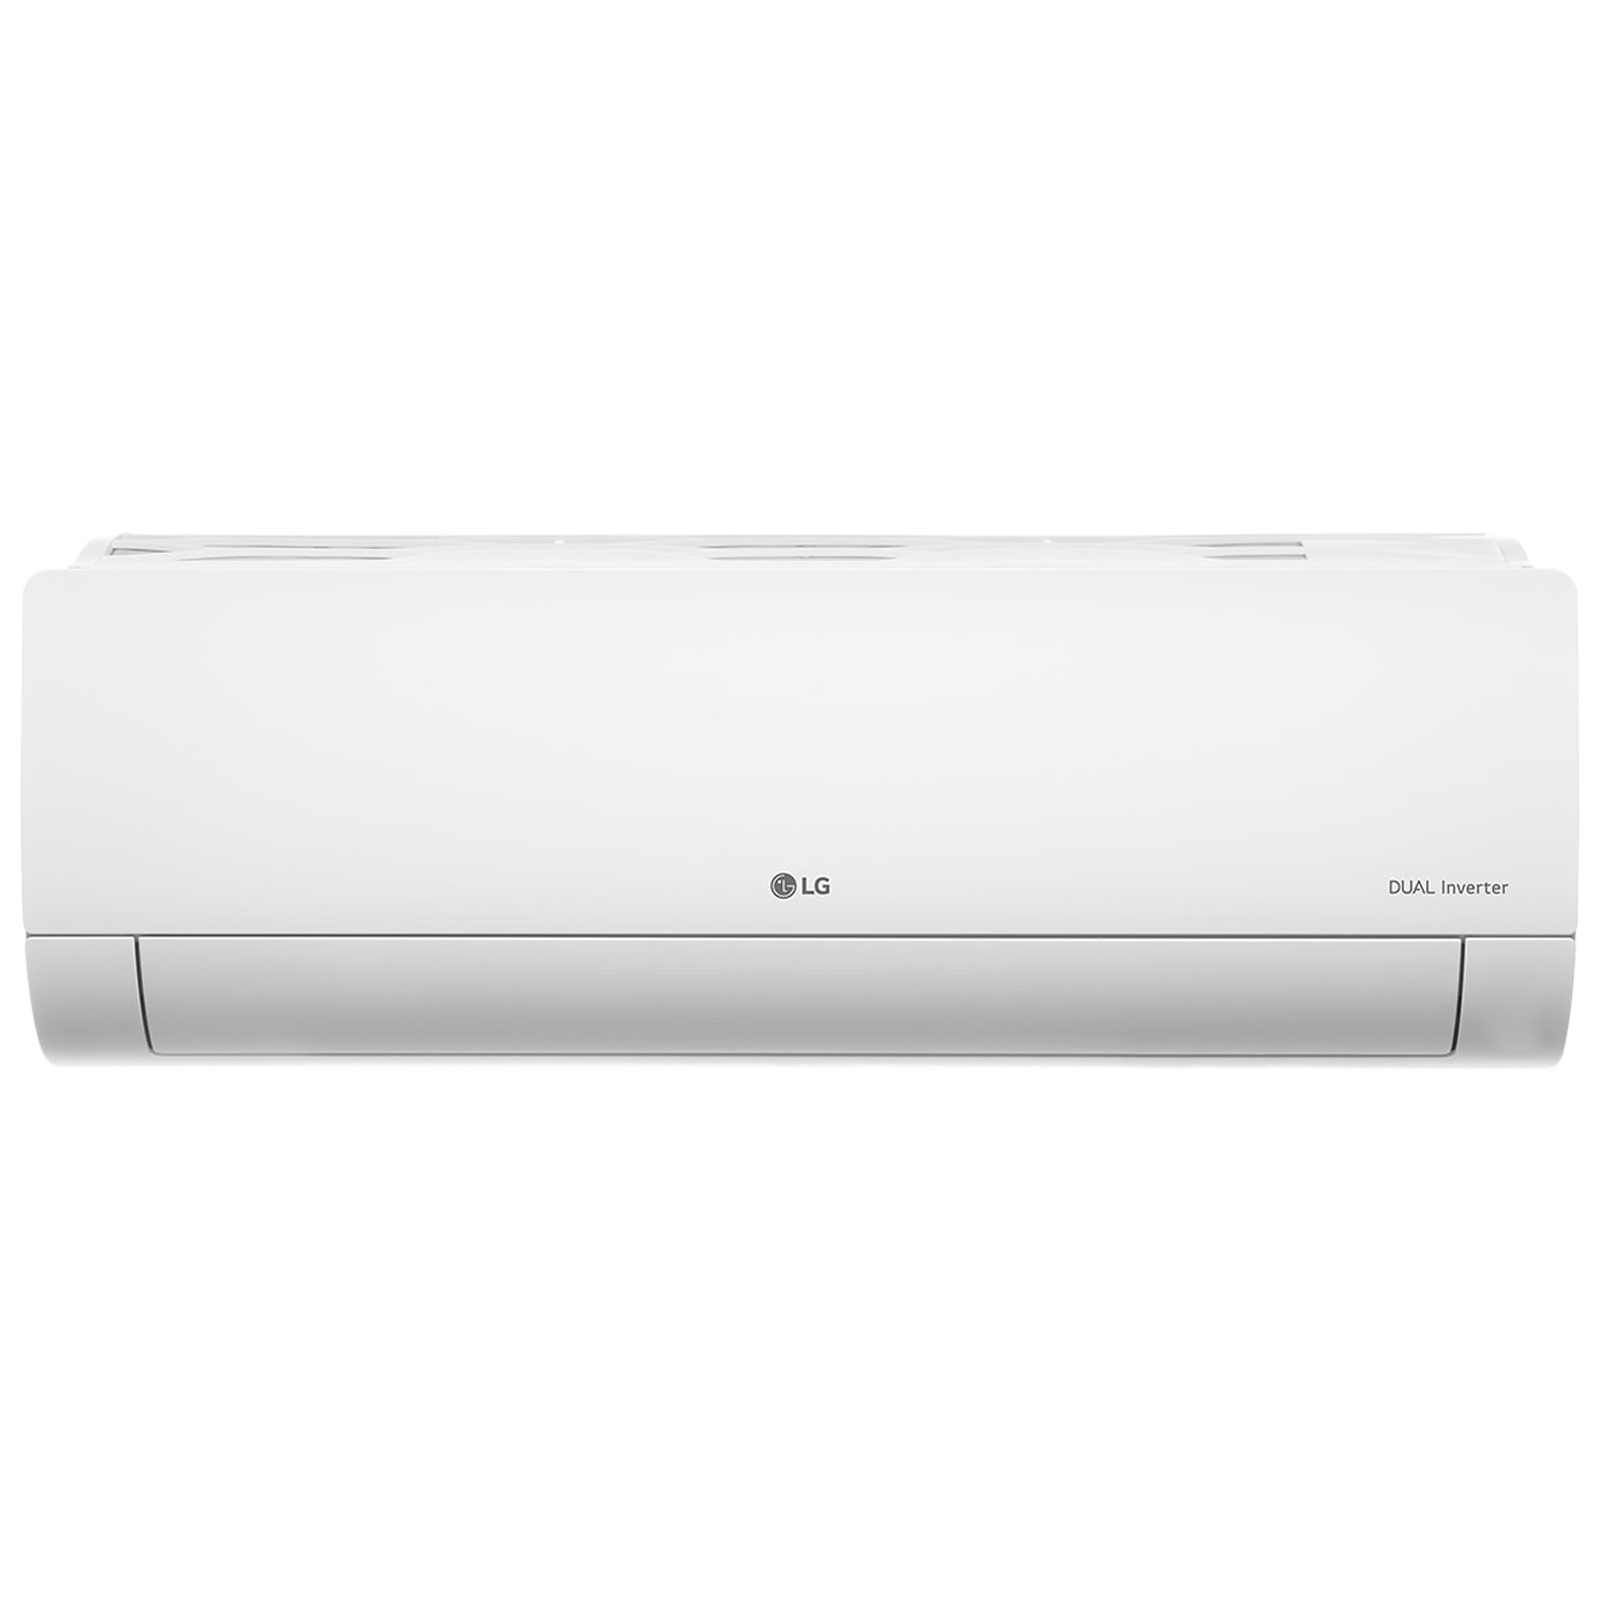 LG 5 in 1 Convertible 1.5 Ton 3 Star Dual Inverter Split AC with HD Filter with Anti Virus Protection (Copper Condenser, PS-Q19ENXA1)_1